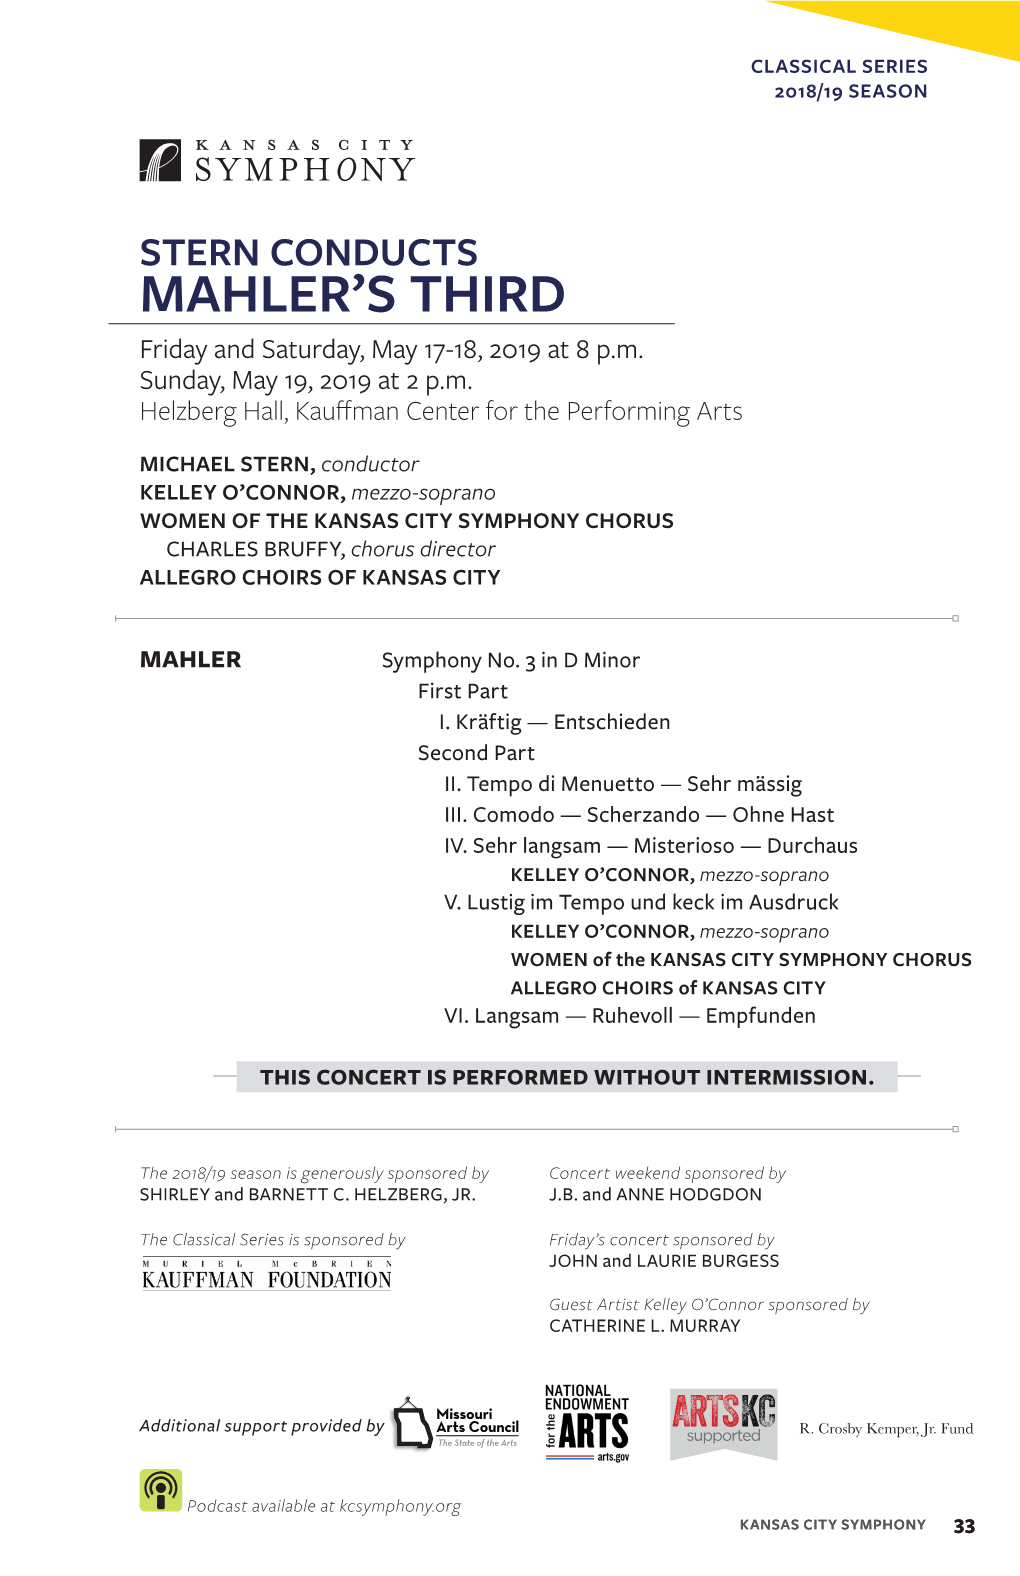 Stern Conducts Mahler's Third